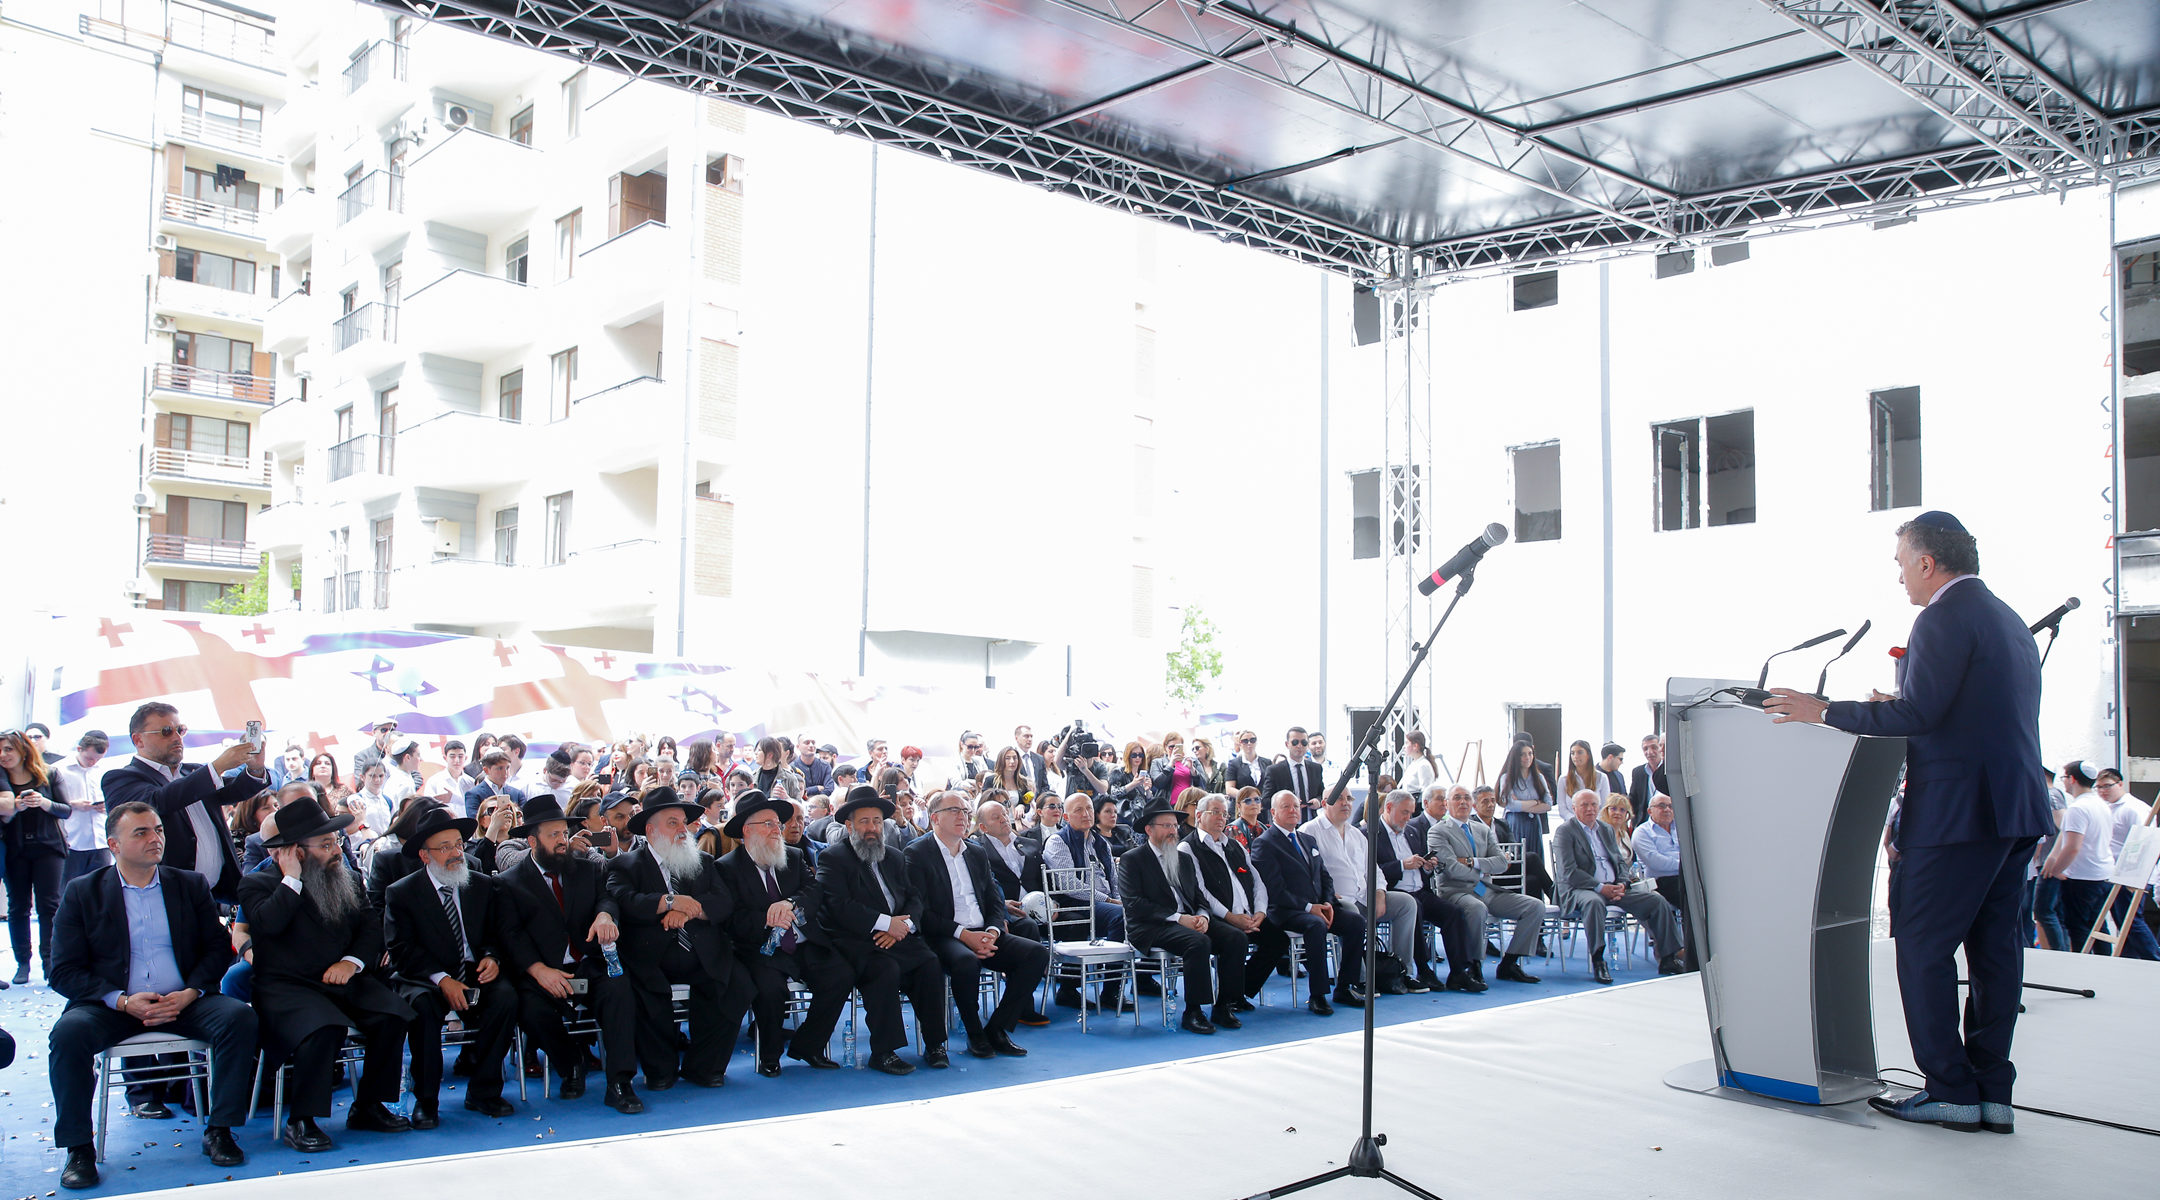 Michael Mirilashvili attending the opening of a new educational complex in Tblisi, Georgia on April 28. (Courtesy of the Euro-Asian Jewish Congress)